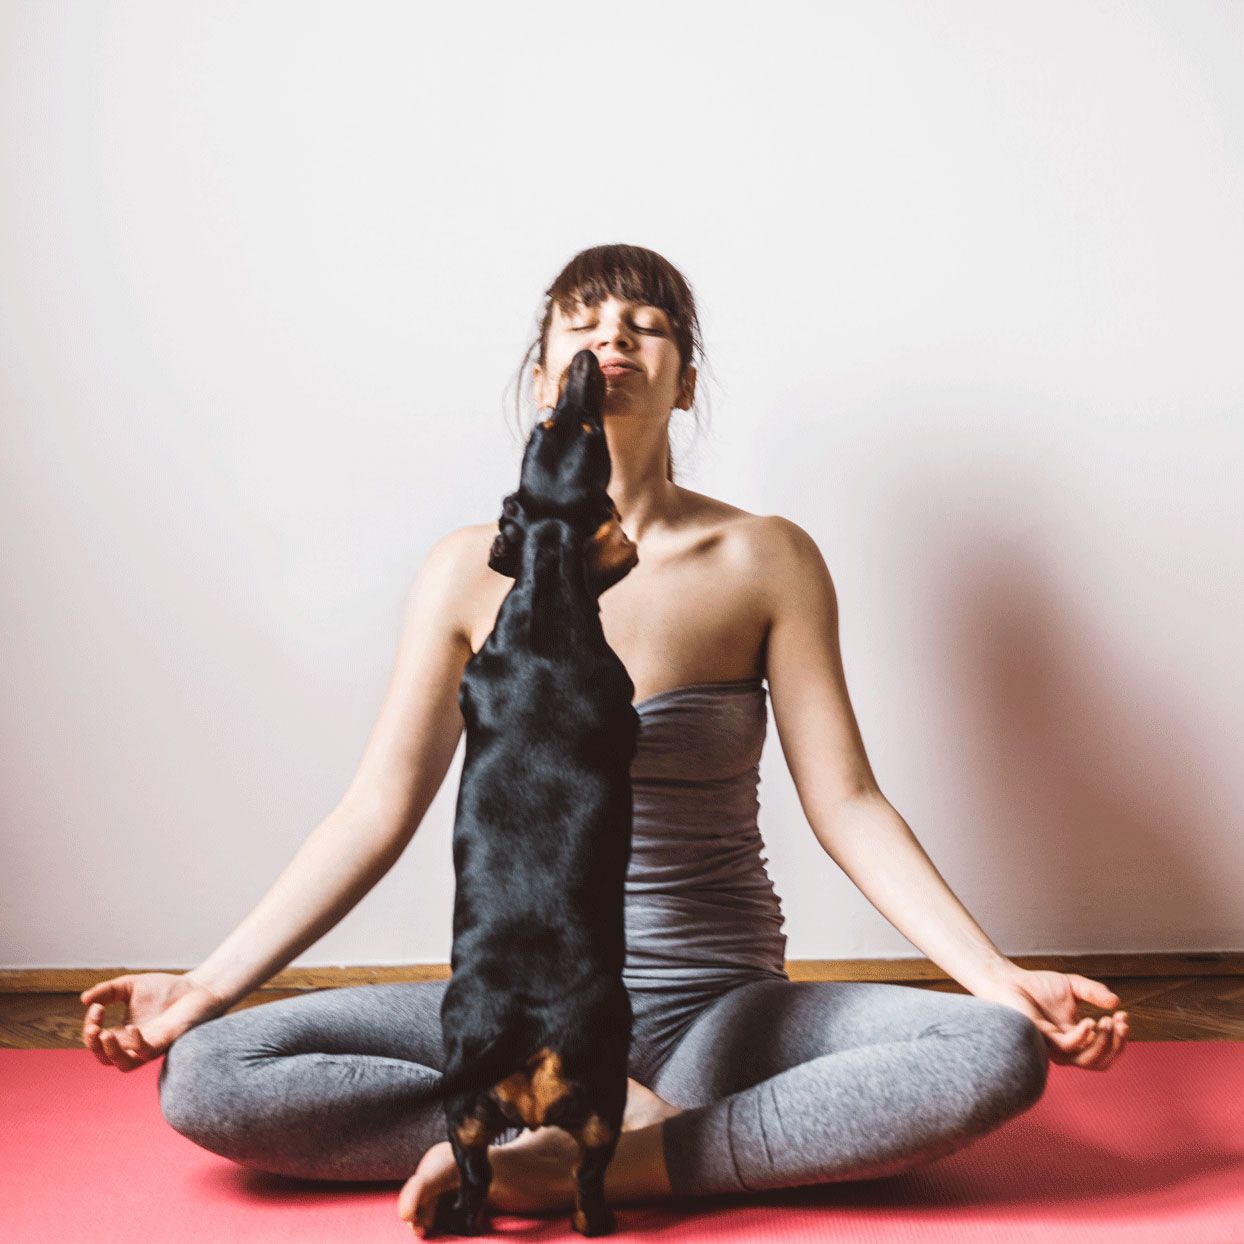 woman in lotus yoga position with small dog jumping up to give her face kisses